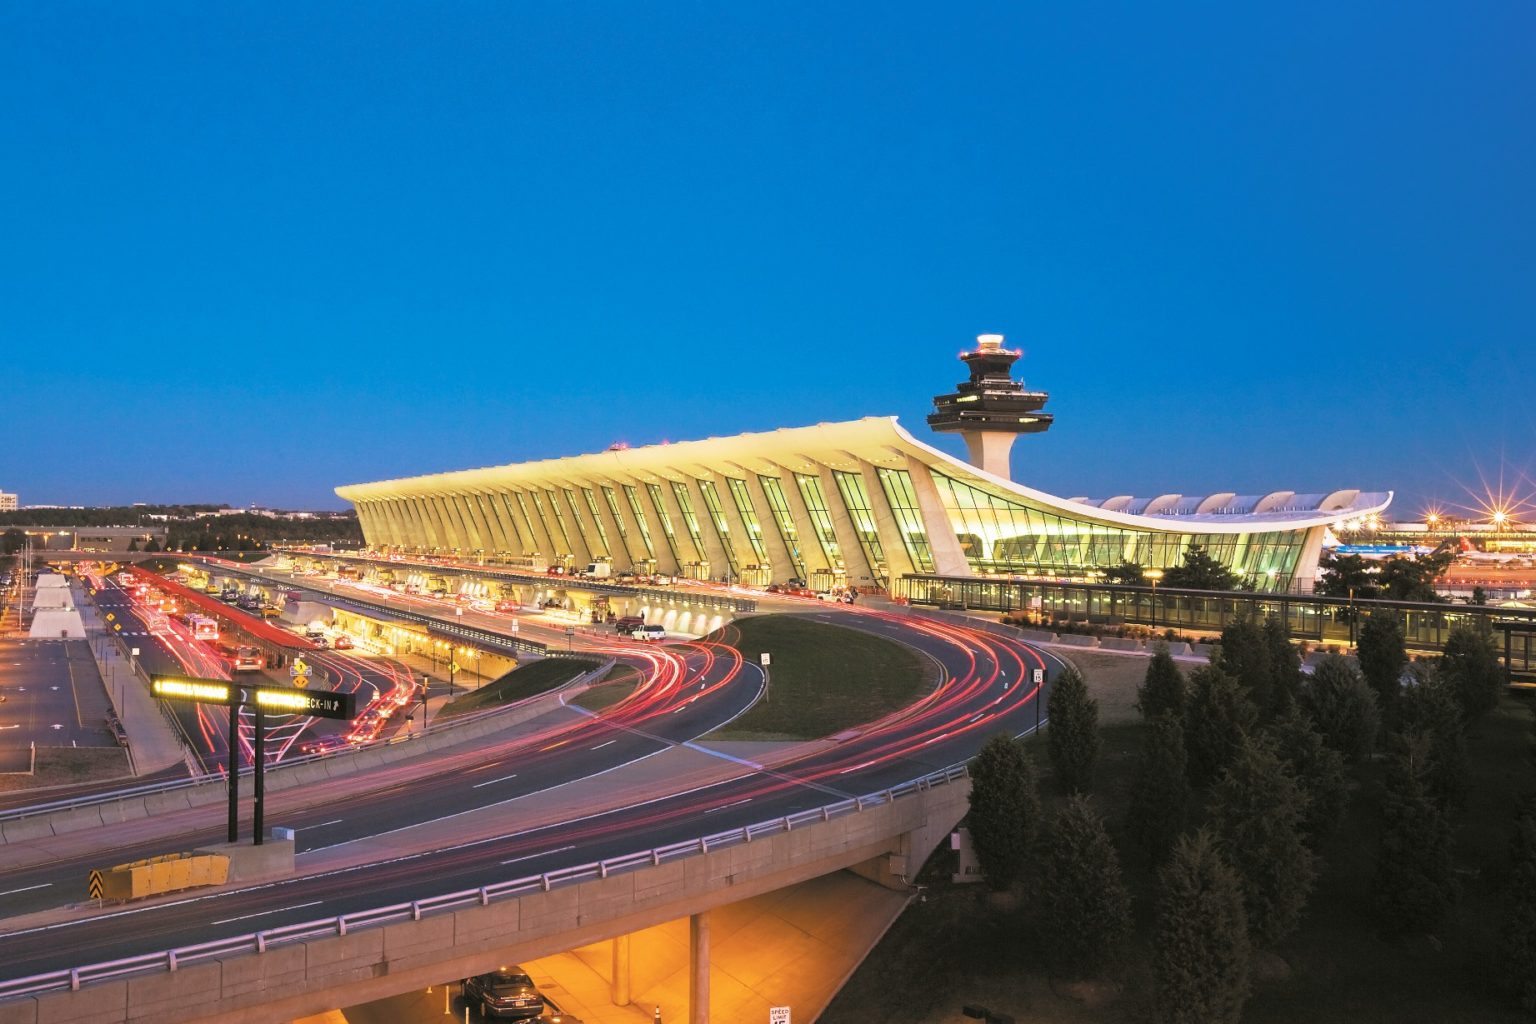 Washington Dulles International Airport Archives - Stuck at the Airport